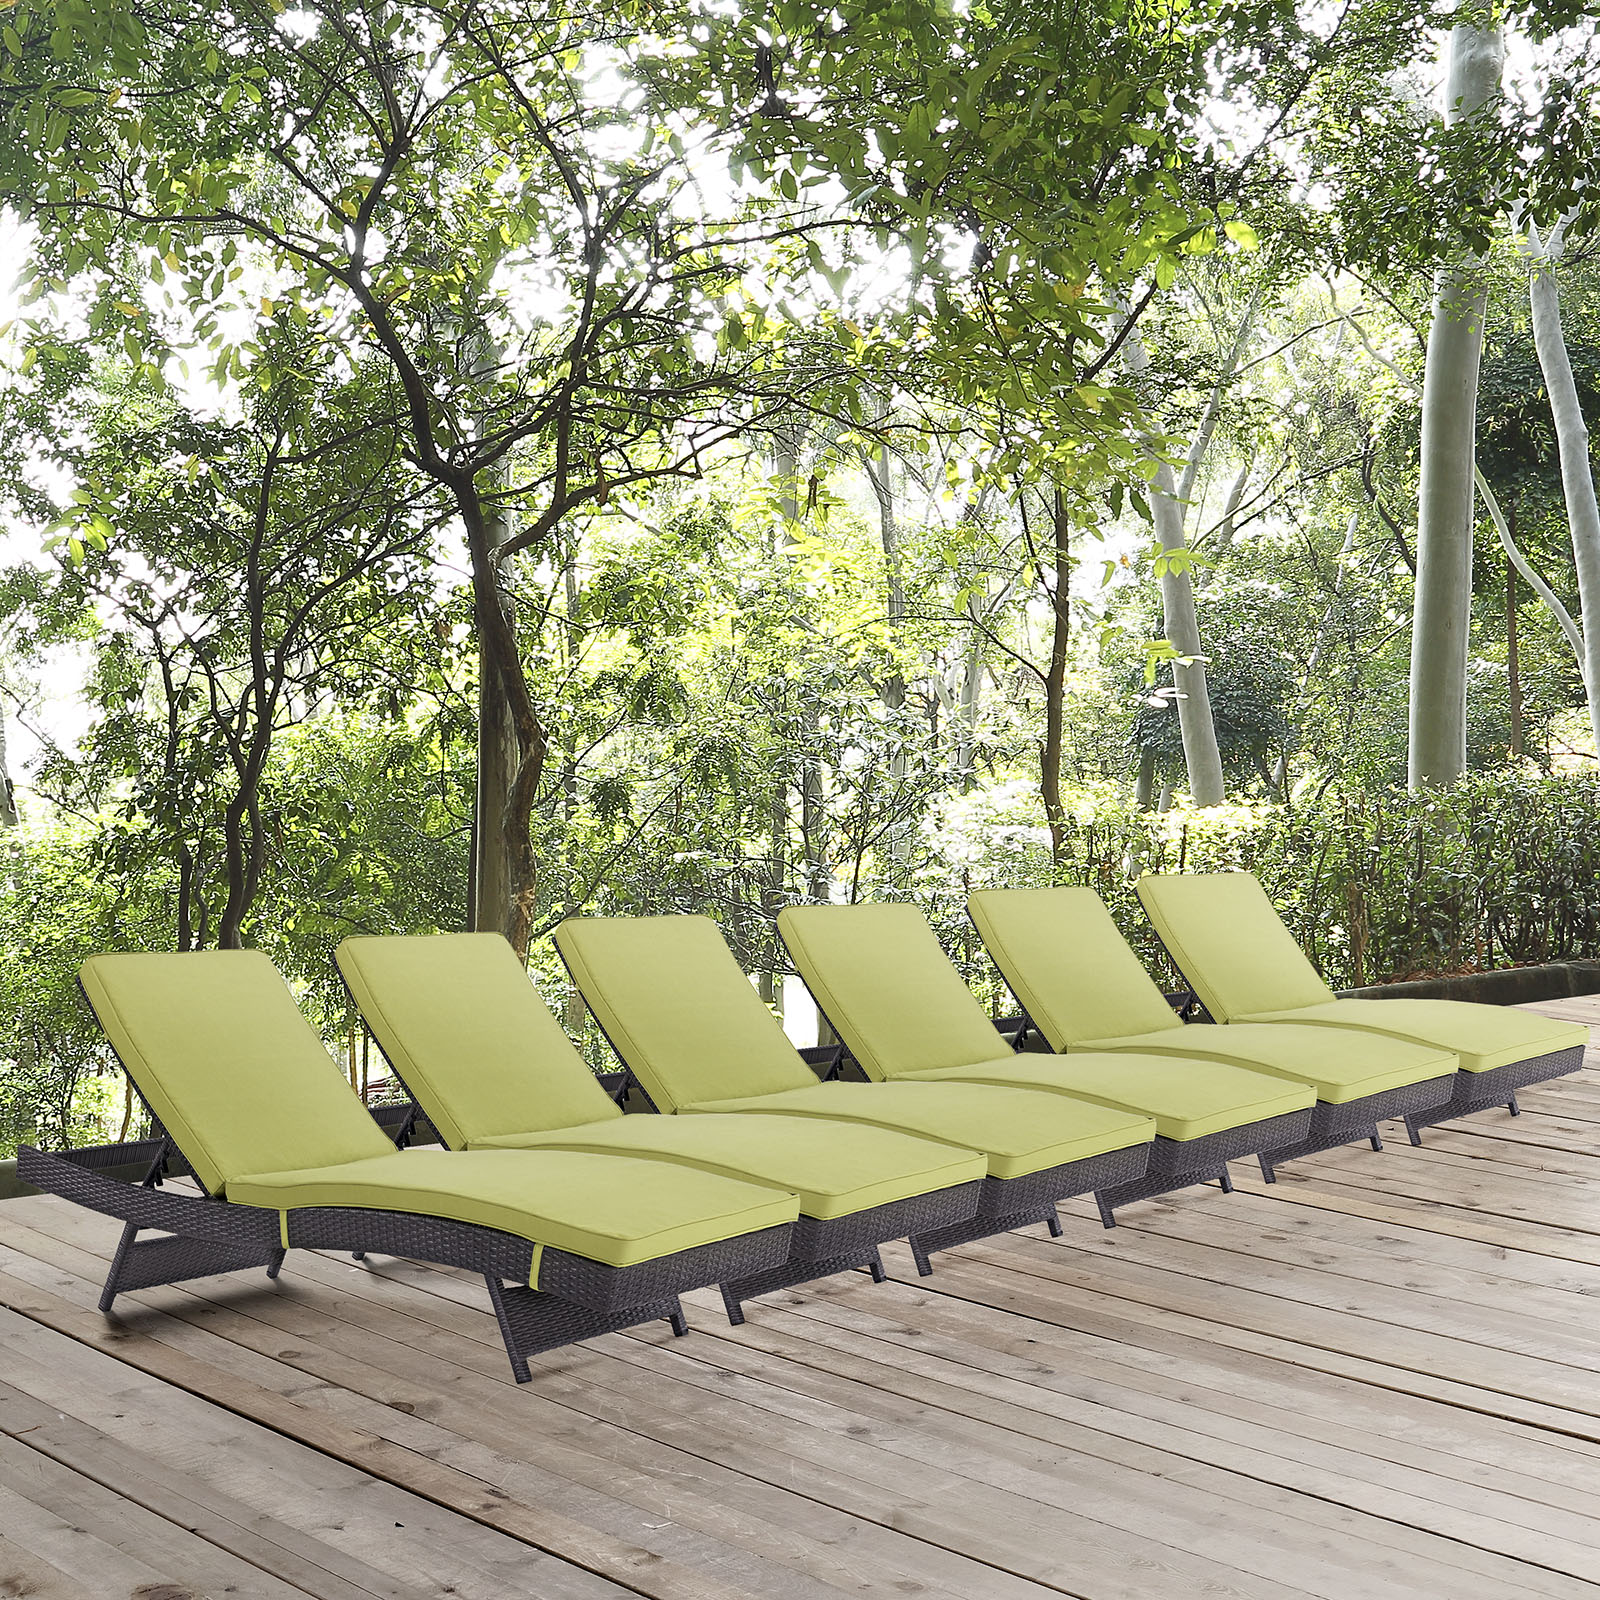 Modway Convene Chaise Outdoor Patio Set of 6 in Espresso Peridot - image 1 of 5